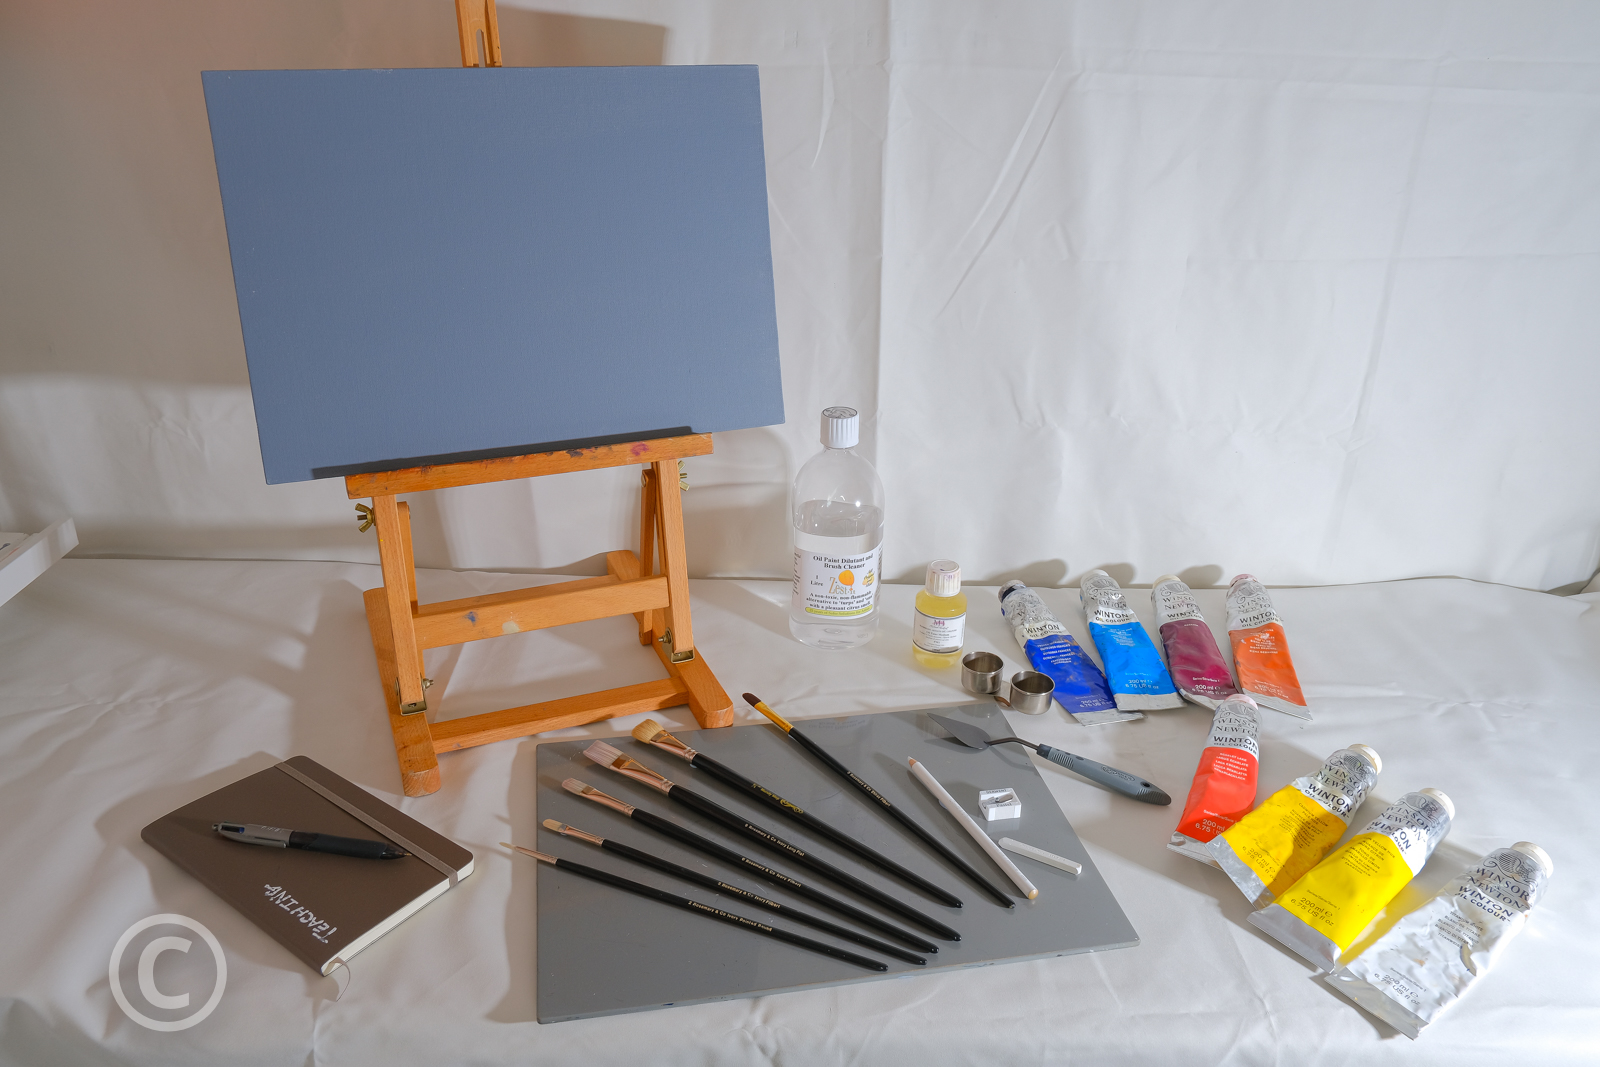 Materials Information Pack for Oil Painting Classes with Chris Mcloughlin